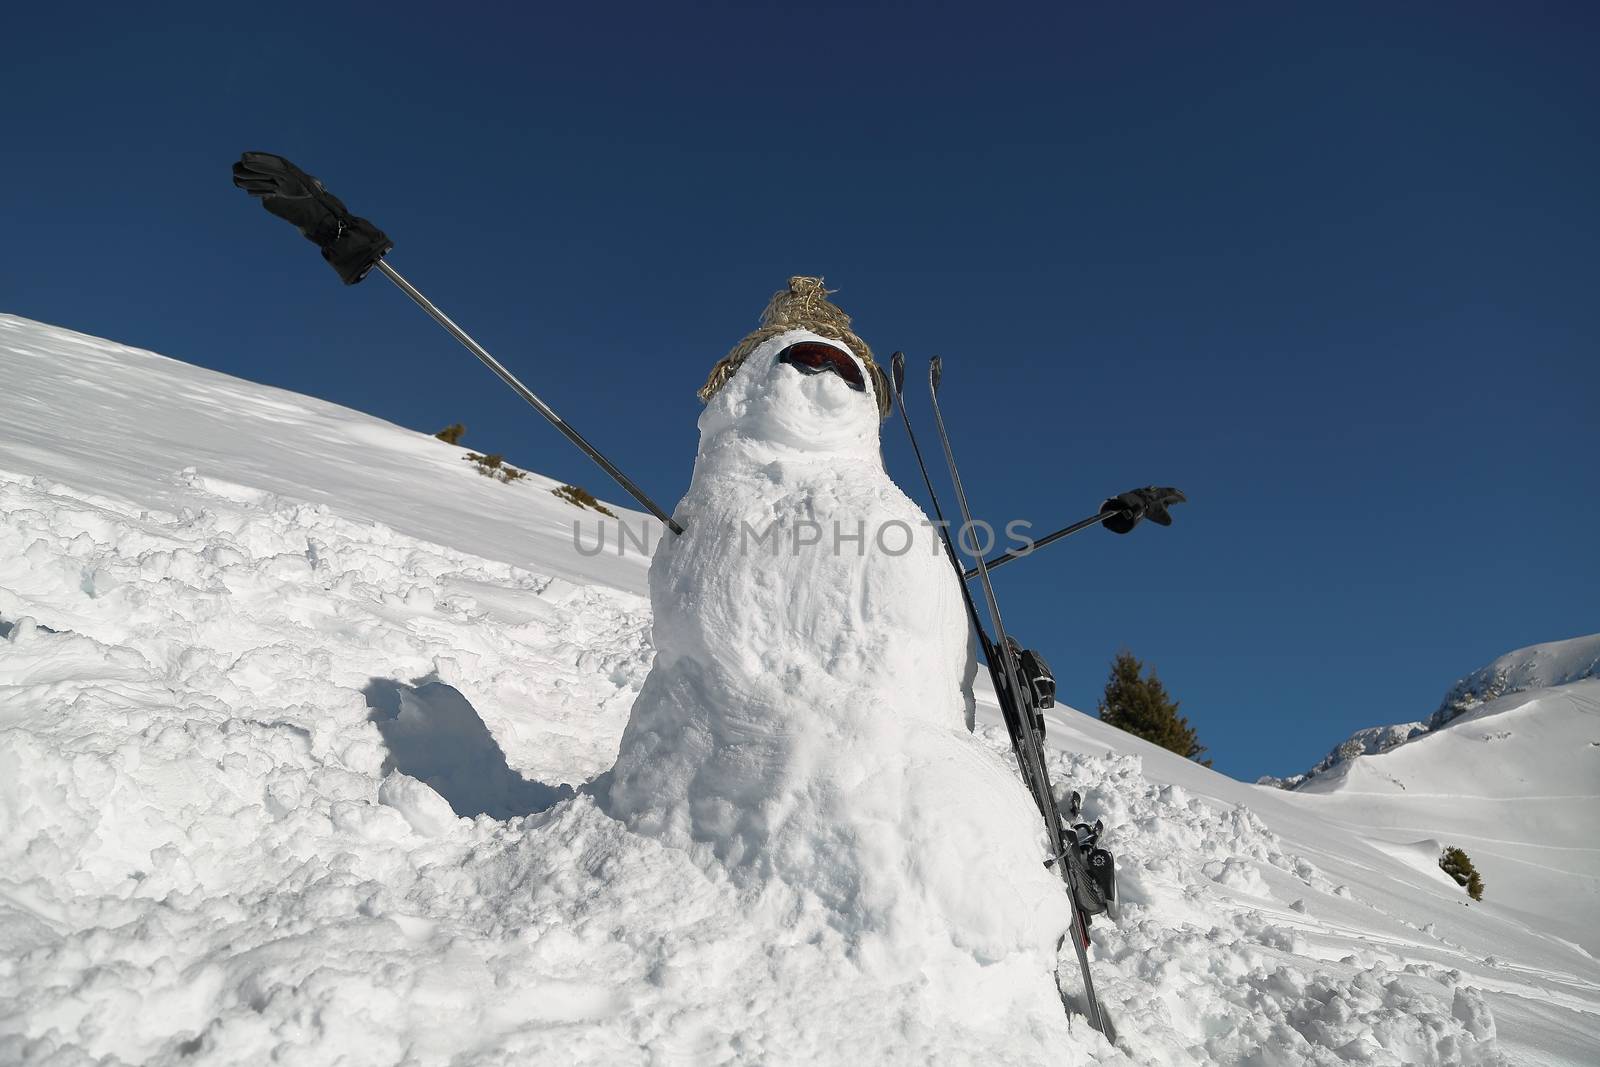 Snowman with skiis built on a slope